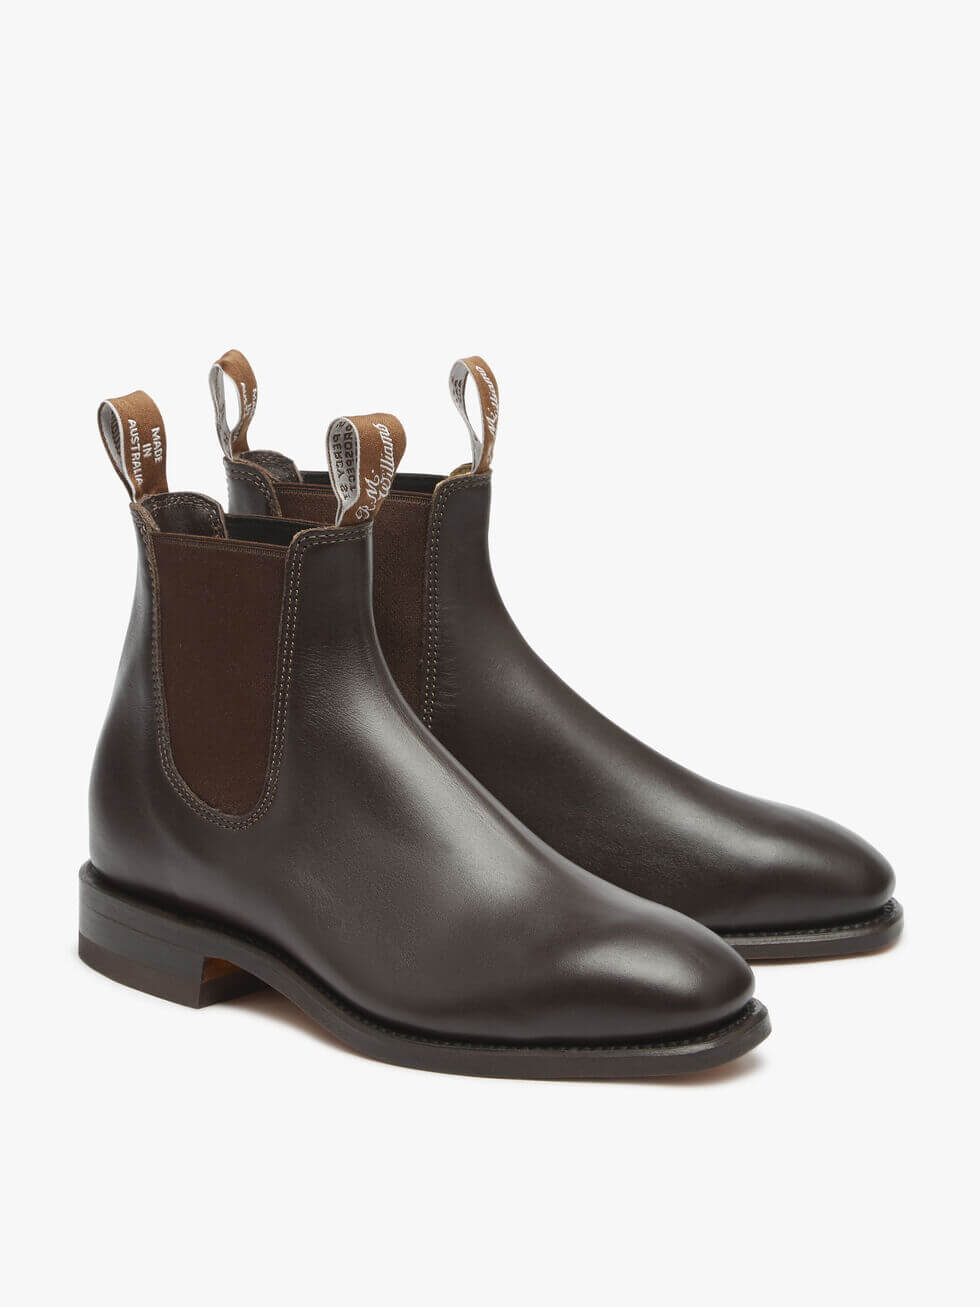 R.M. Williams Chestnut Craftsman Boot Yearling Leather | Davids Of Haslemere